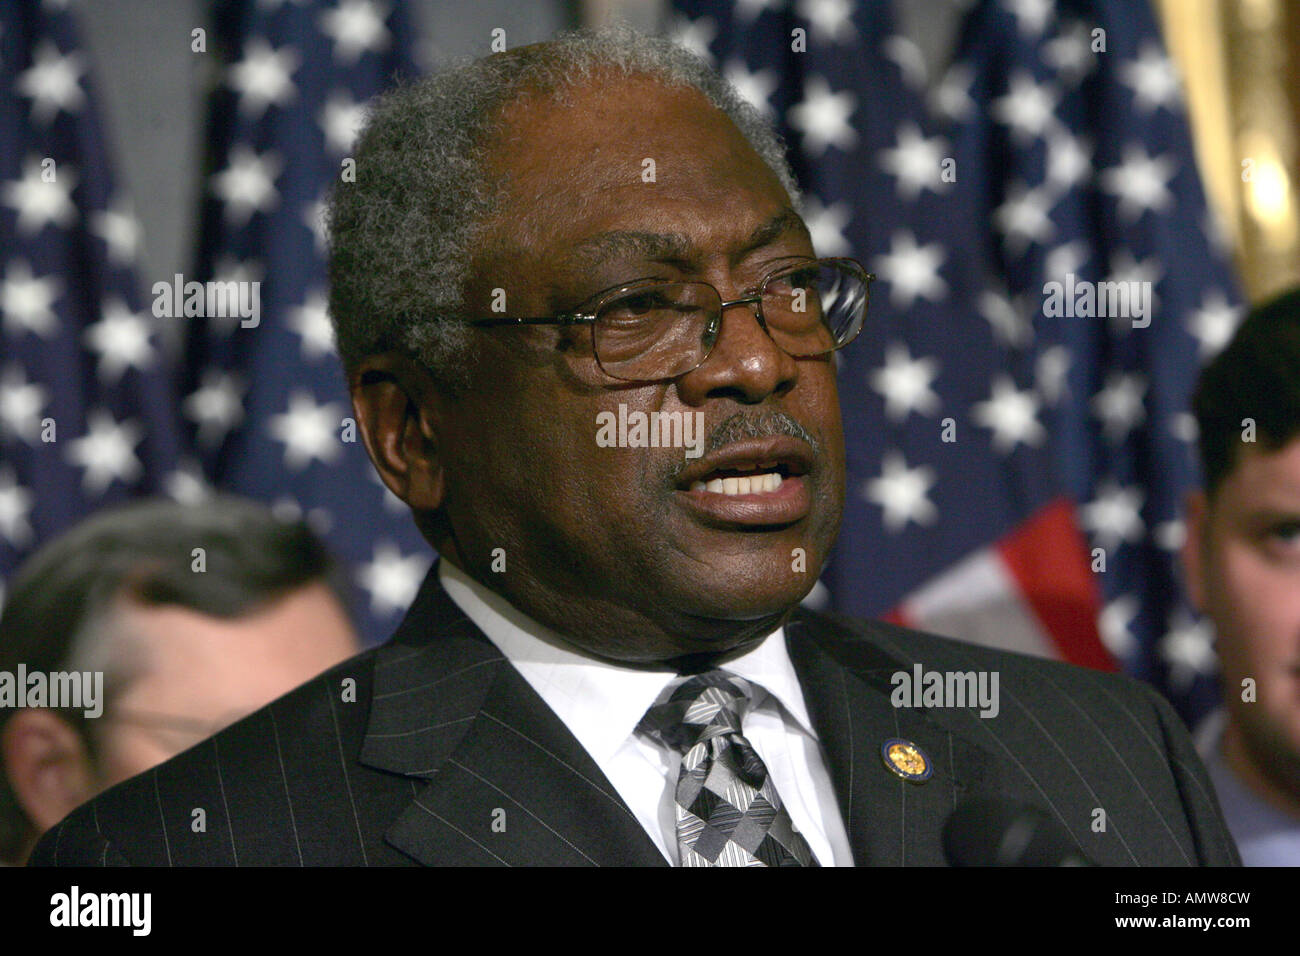 House of Representives Whip James Clyburn D-SC talks to press after the passage of the vote on US Troop Readiness, Stock Photo